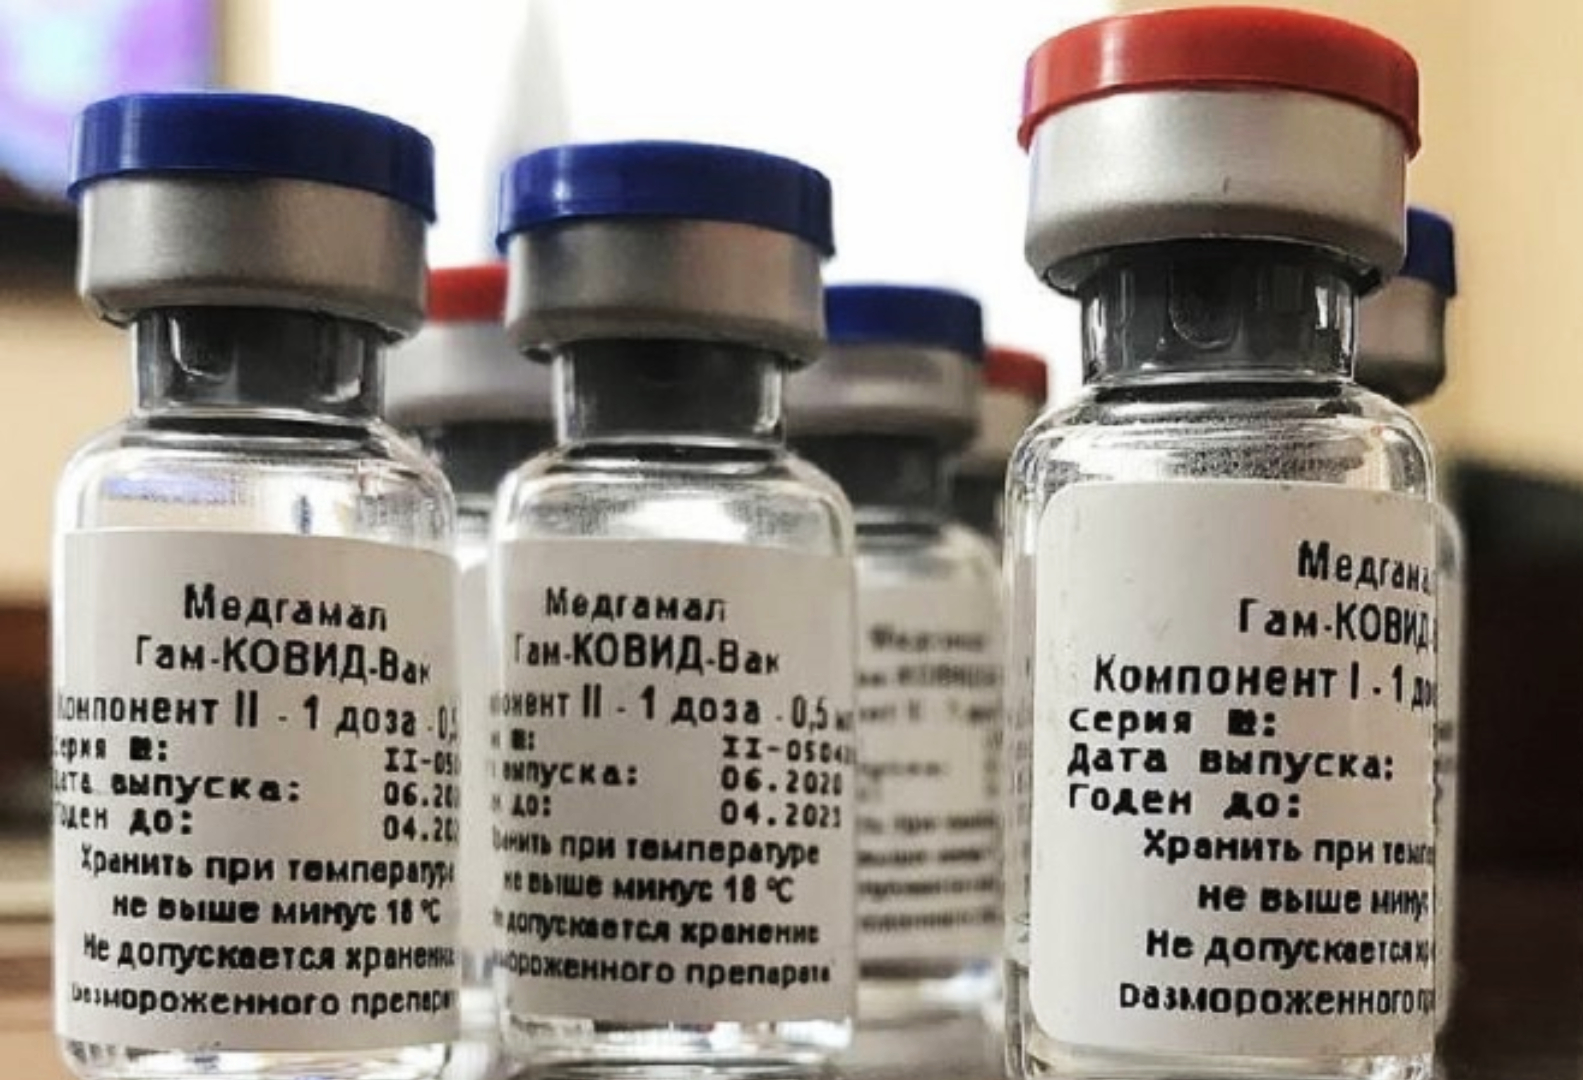 India Declines To Test Russias Sputnik-V Corona Vaccine In Large Study